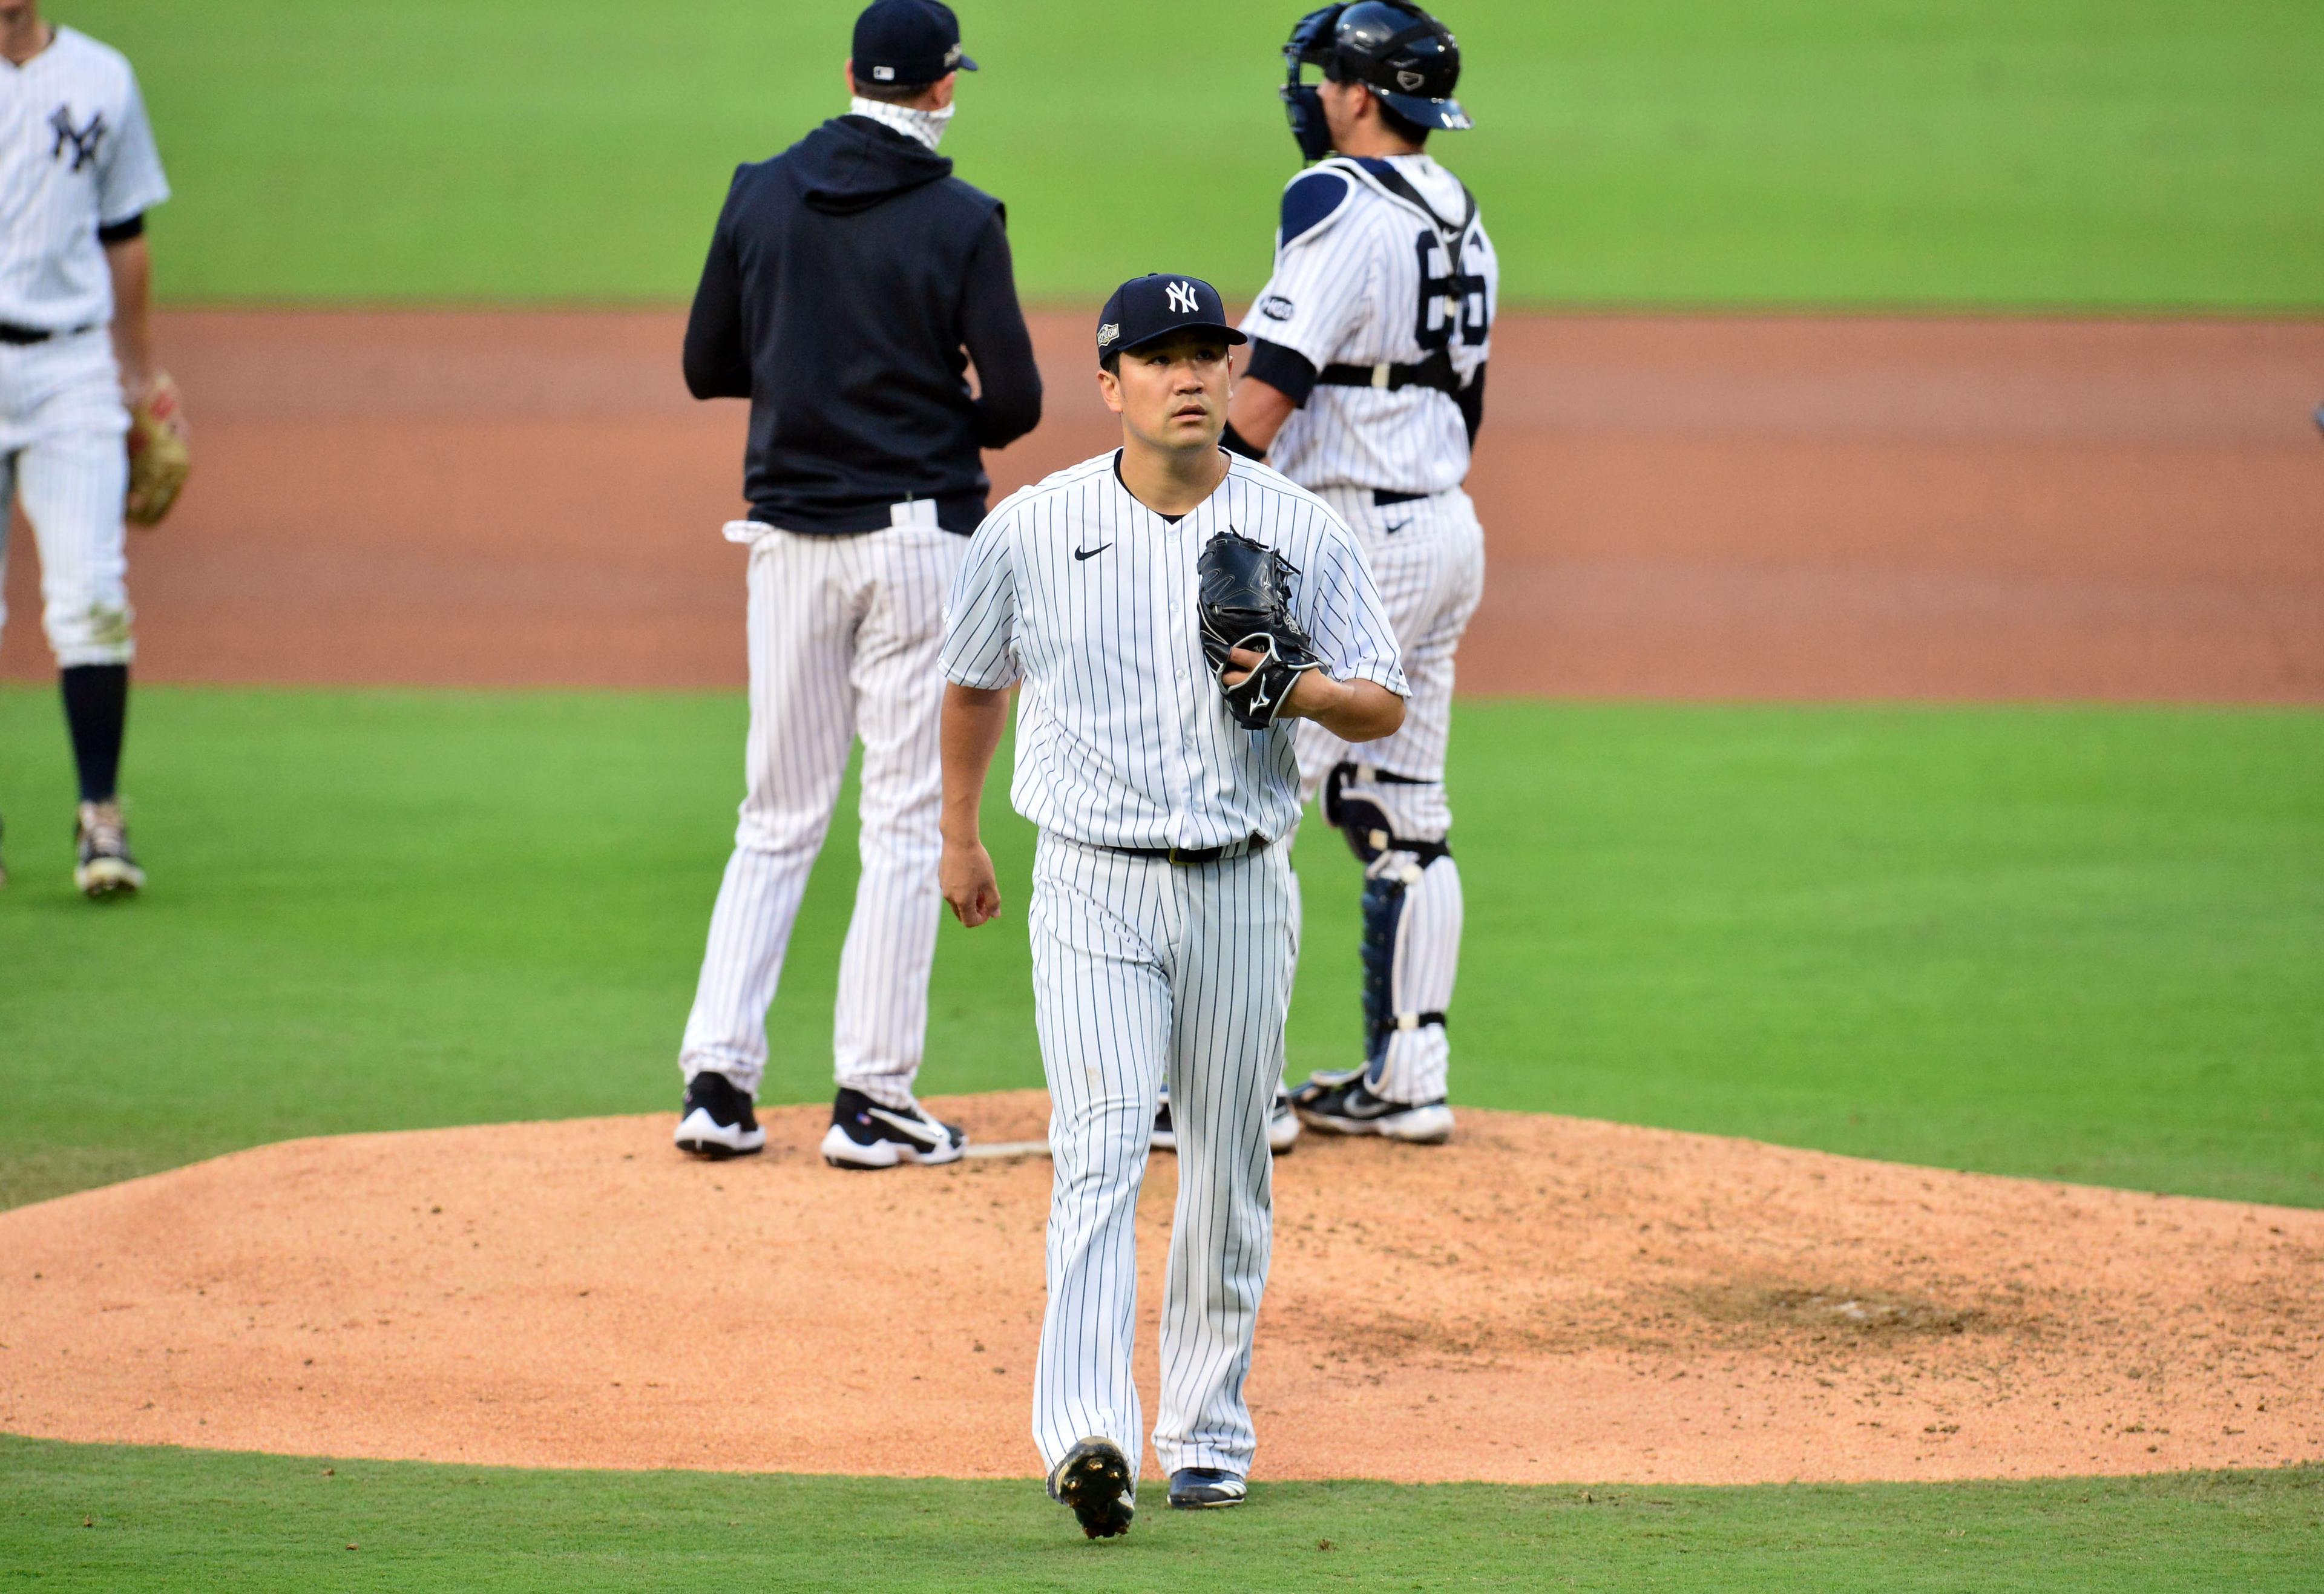 New York Yankees starting pitcher Masahiro Tanaka (19) is relieved in the fifth inning against the Tampa Bay Rays during game three of the 2020 ALDS at Petco Park. / Gary A. Vasquez - USA Today Sports